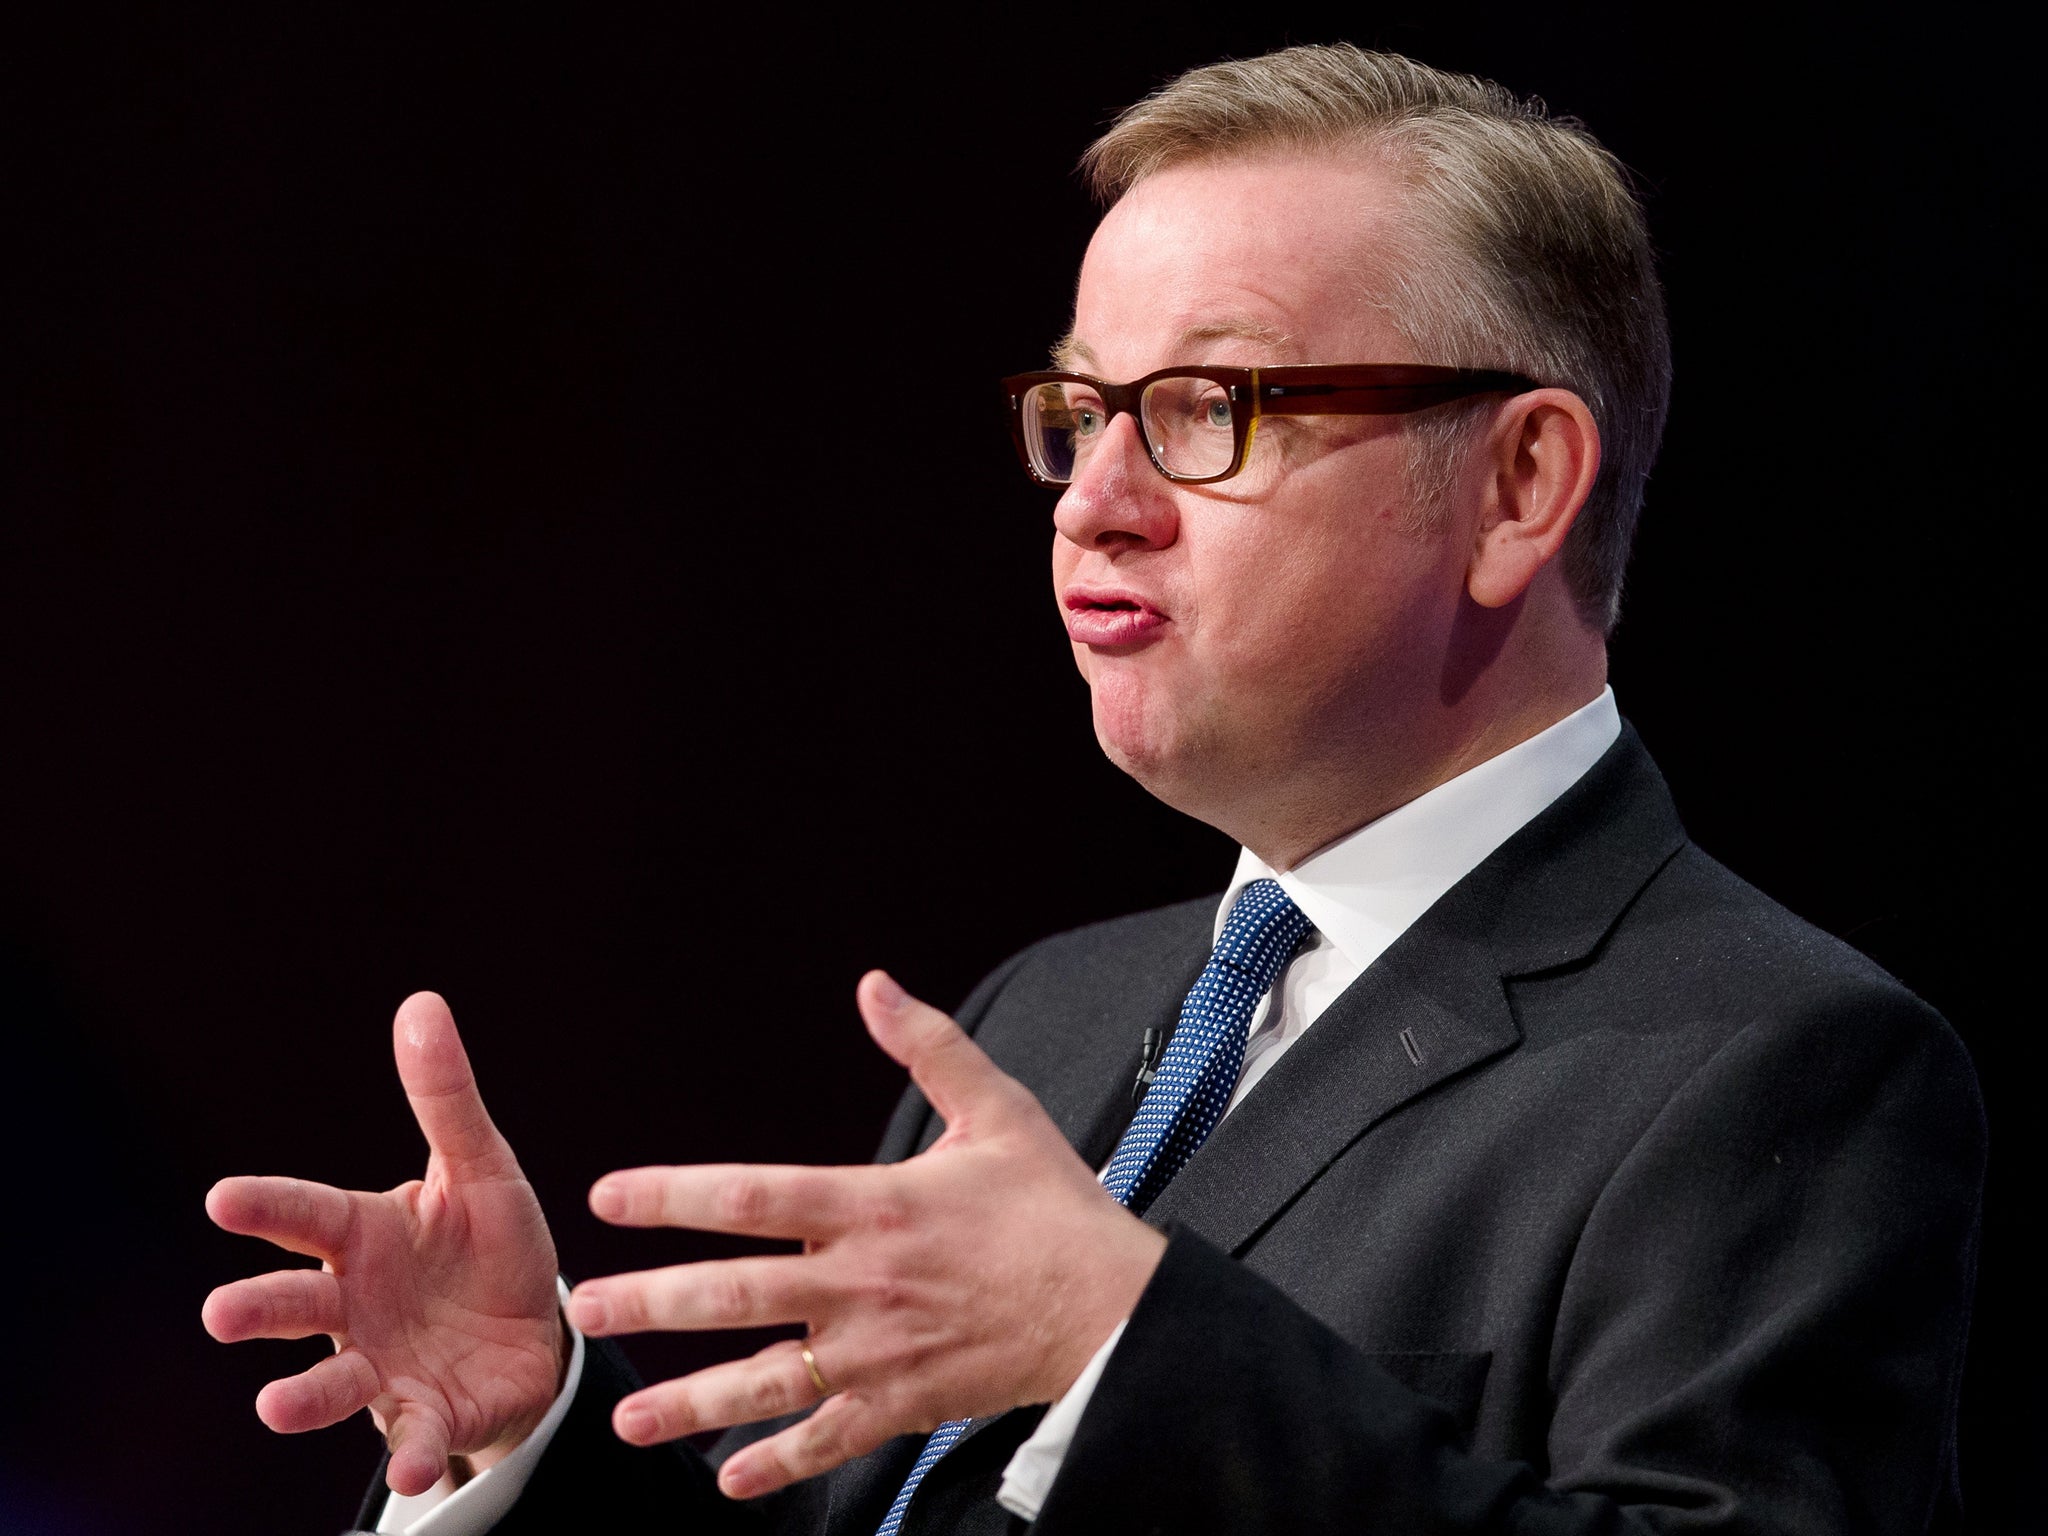 Loads of hot sex Michael Gove on why young business people come to London The Independent The Independent